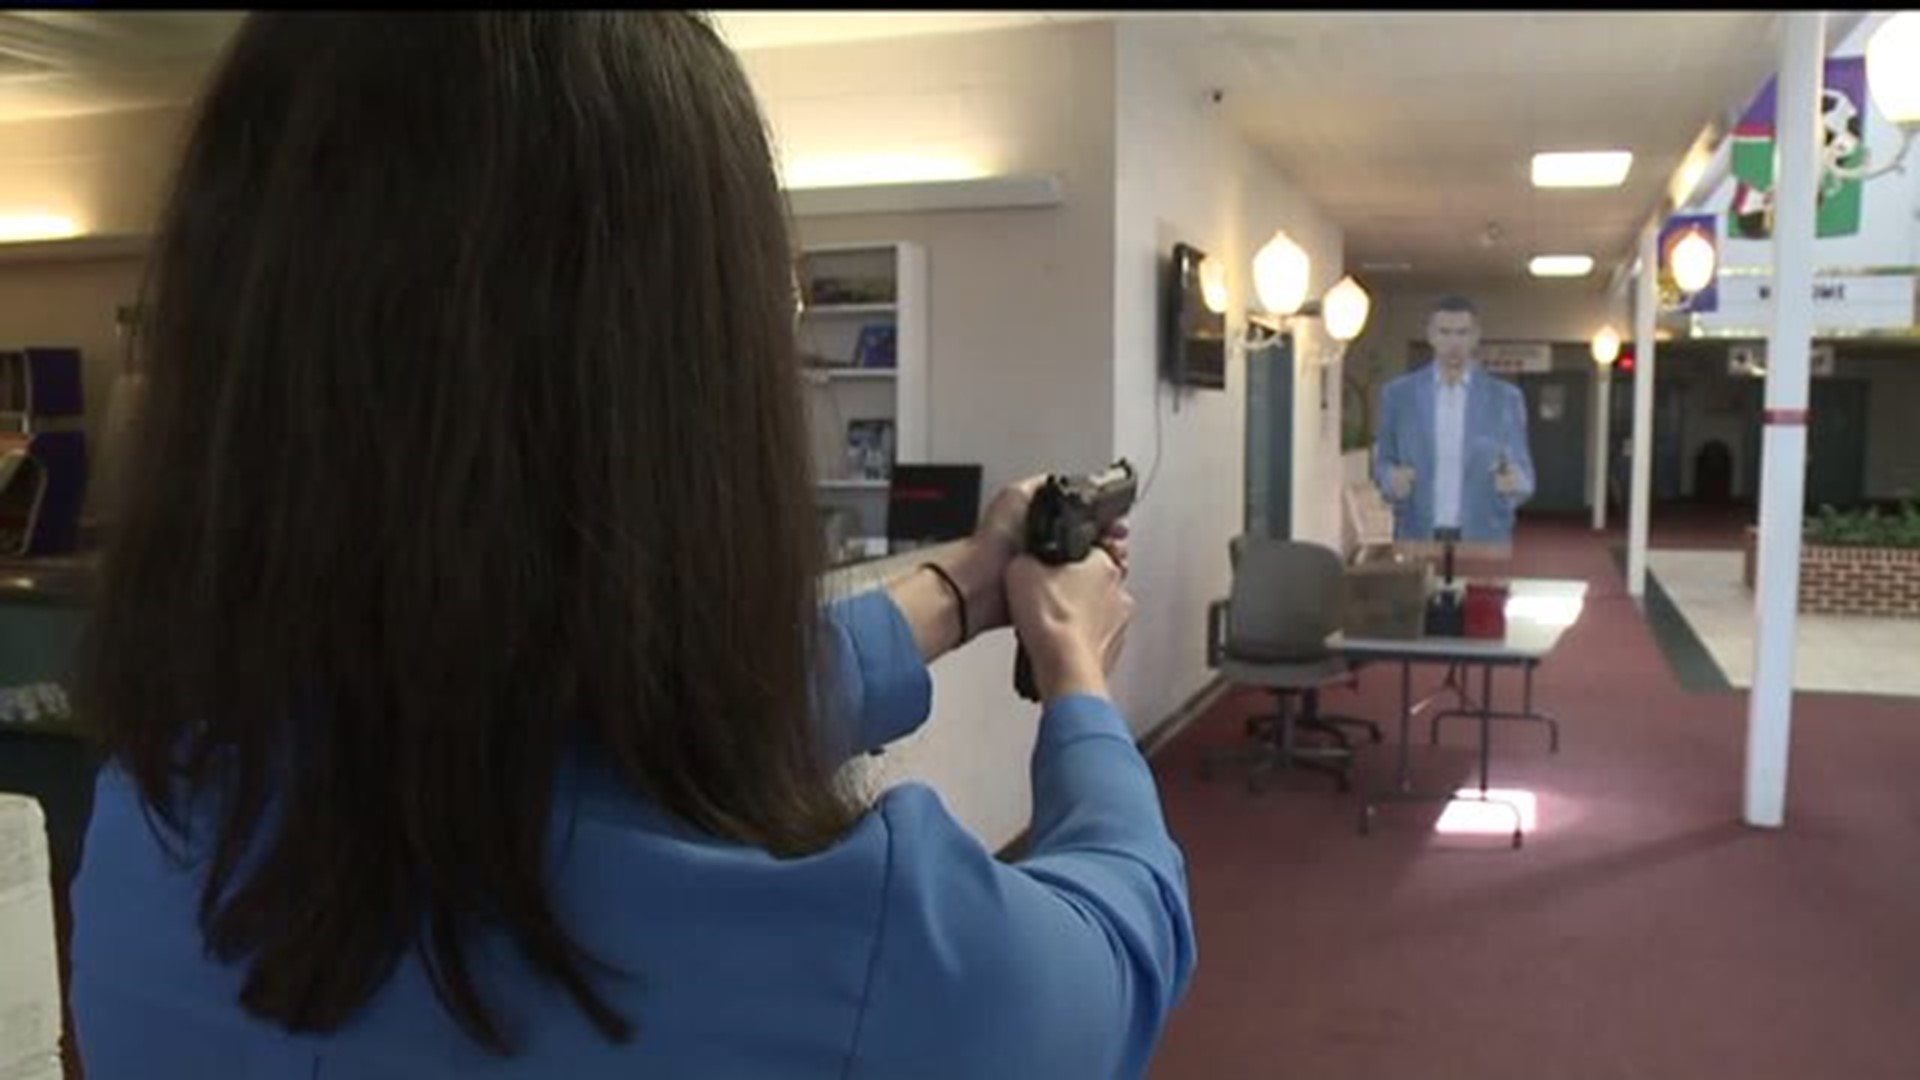 Moving target system introduced to Central Pennsylvania